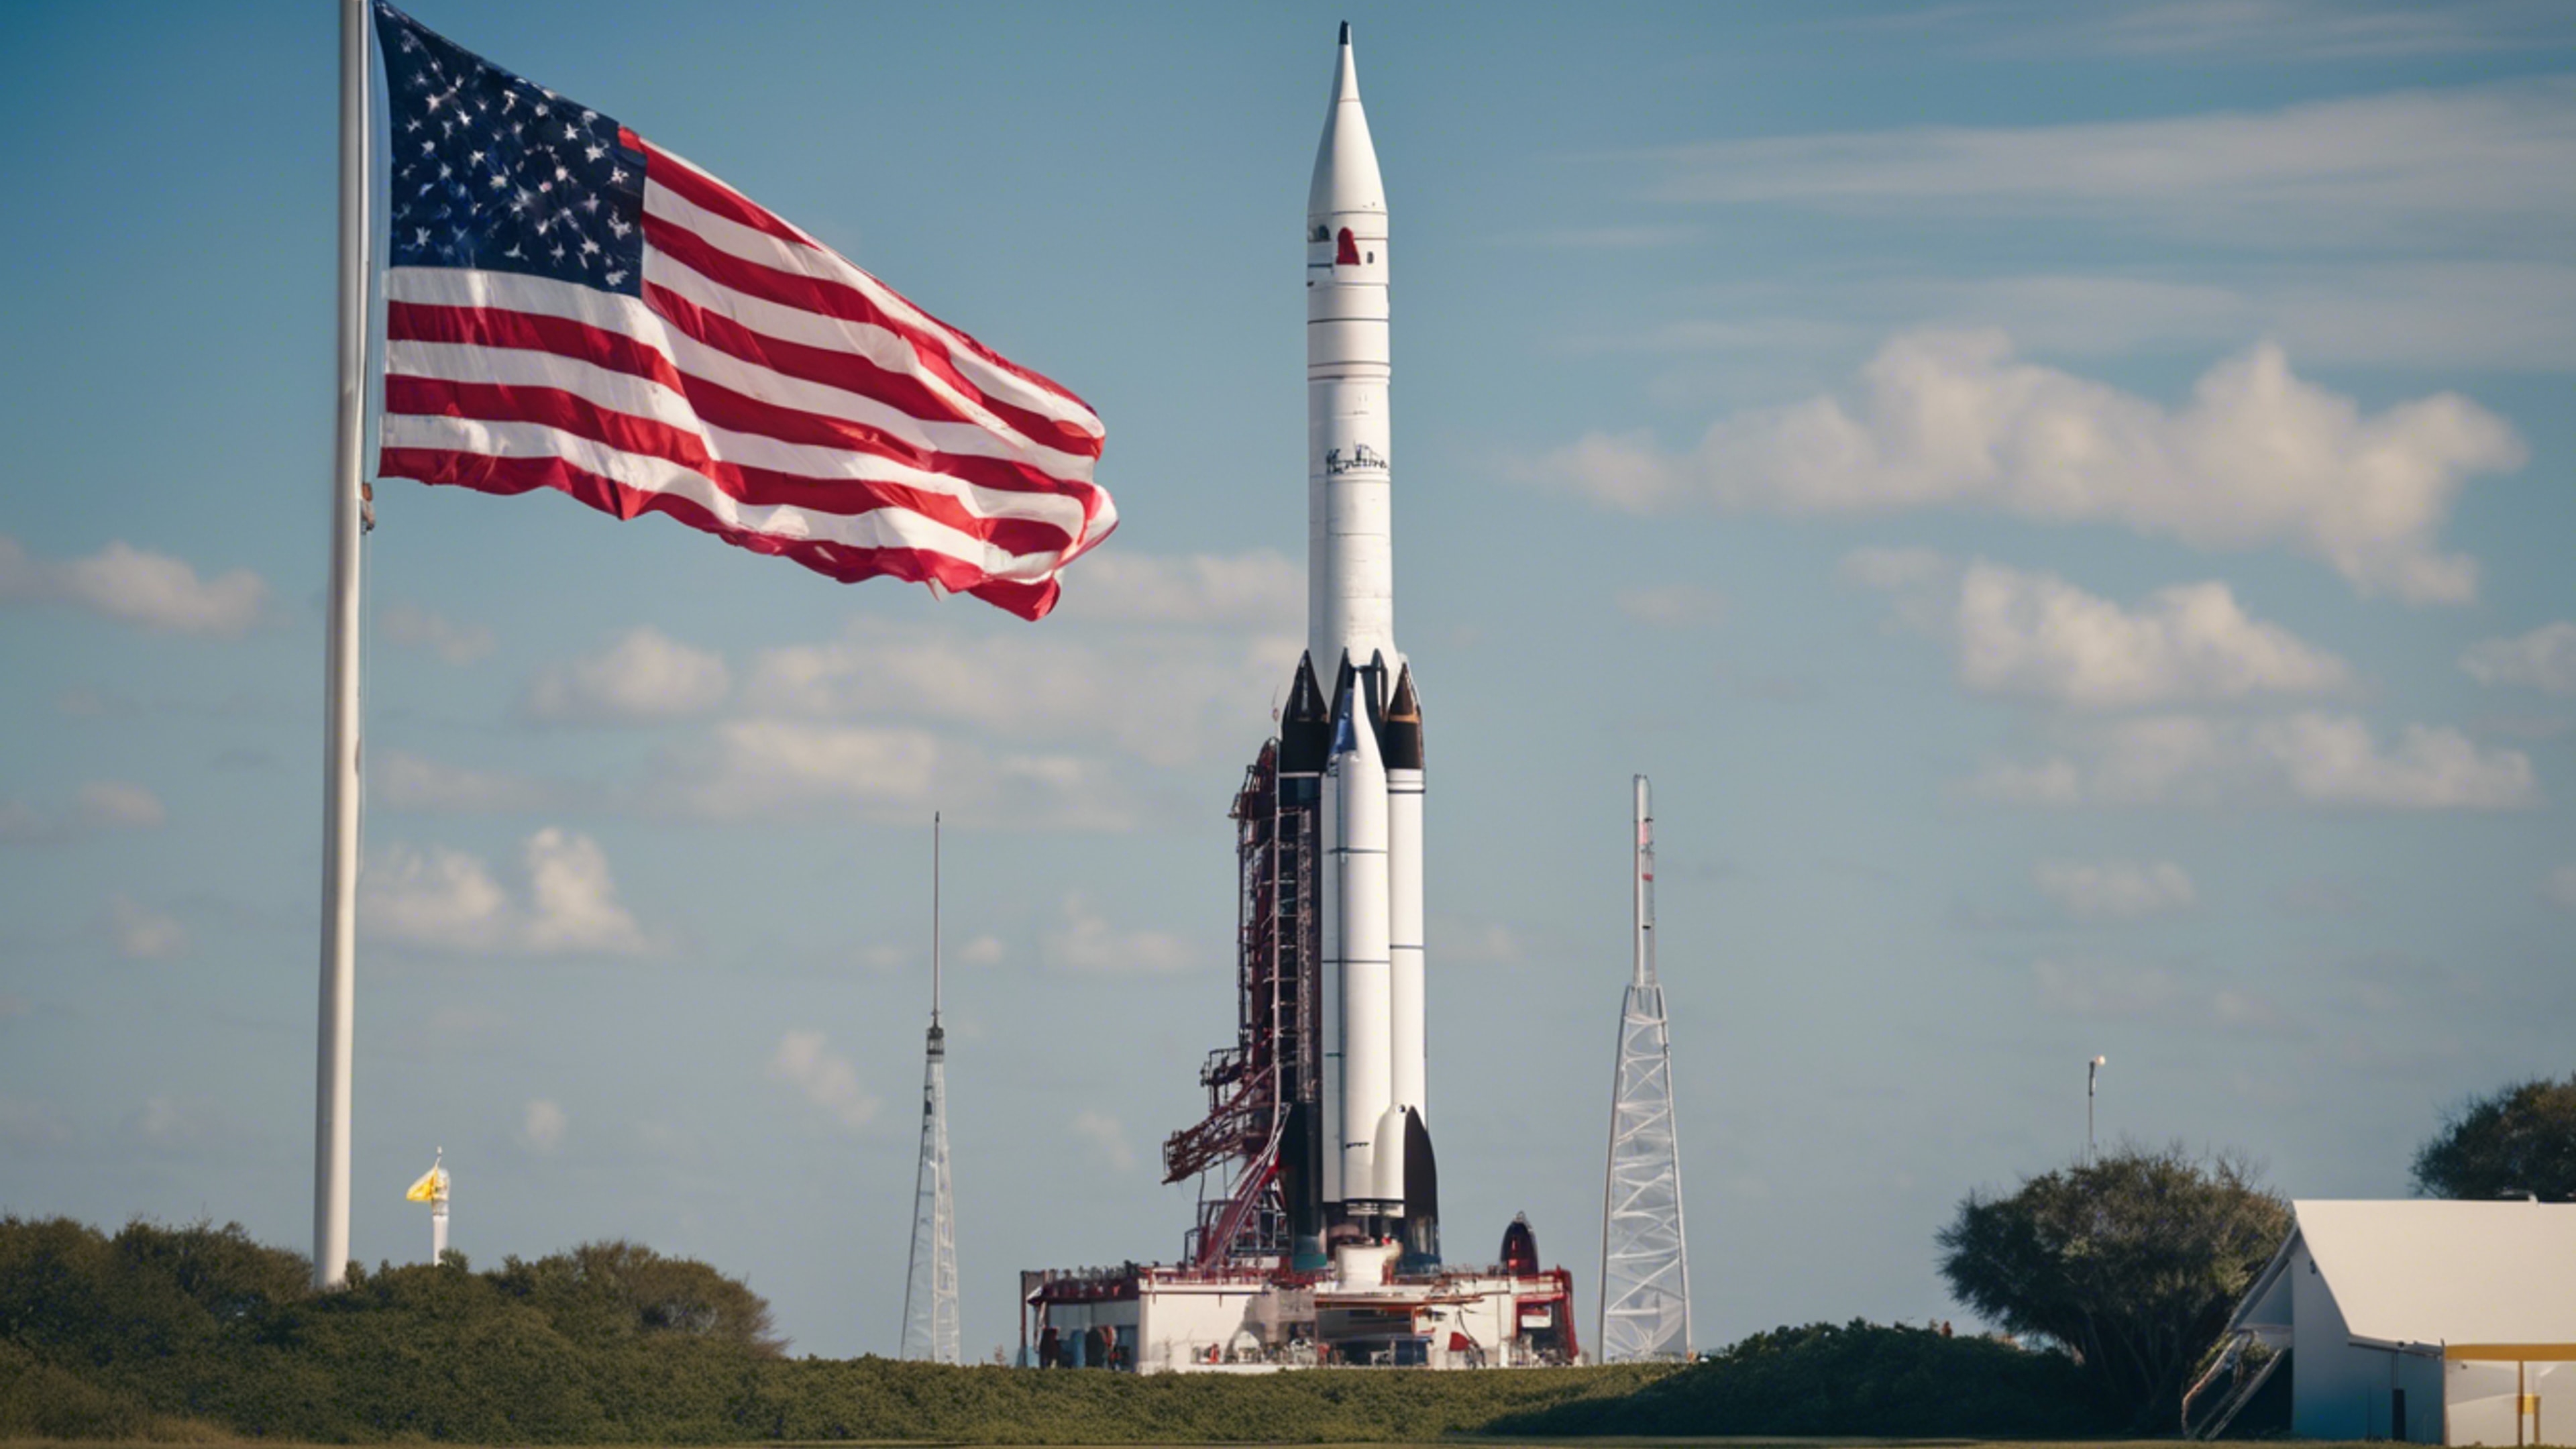 A historic rocket display at Cape Canaveral, with a clear blue sky and the American flag waving in the background. Tapet[7e3199d5ab33424fb953]